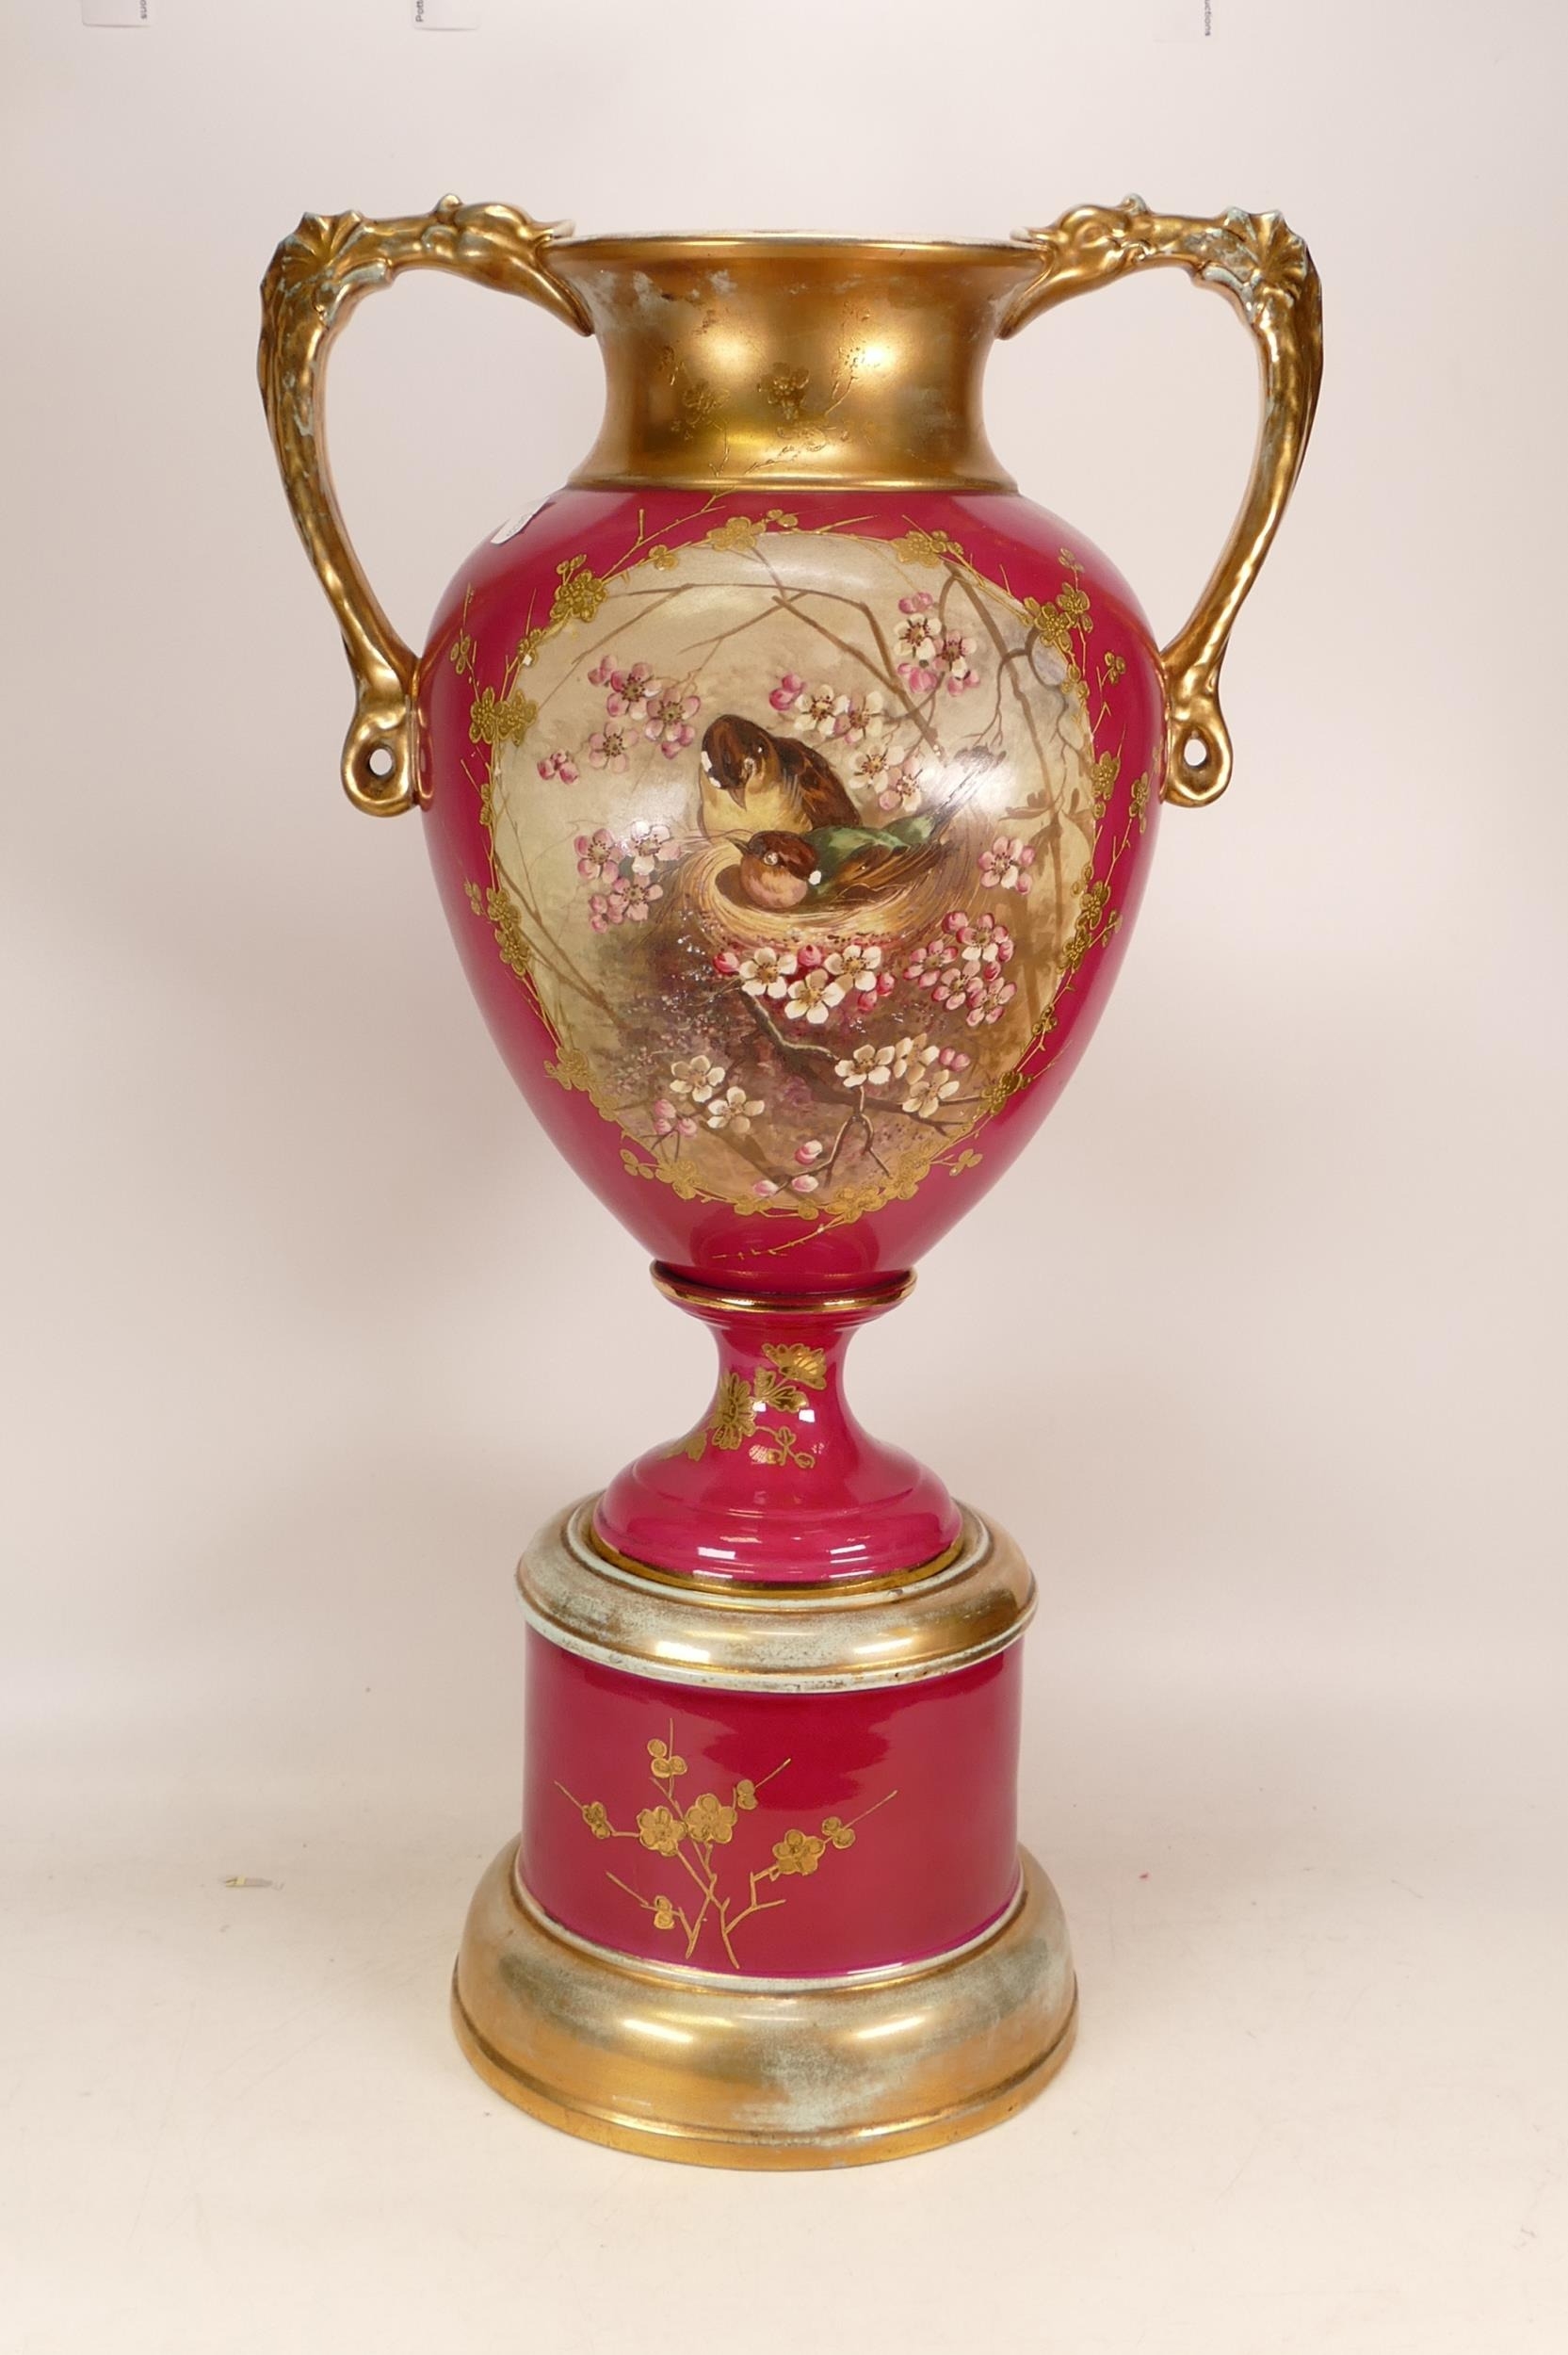 Large Victorian Handpainted Urn on Pedestal. Painted with image of nesting birds. Crazing and